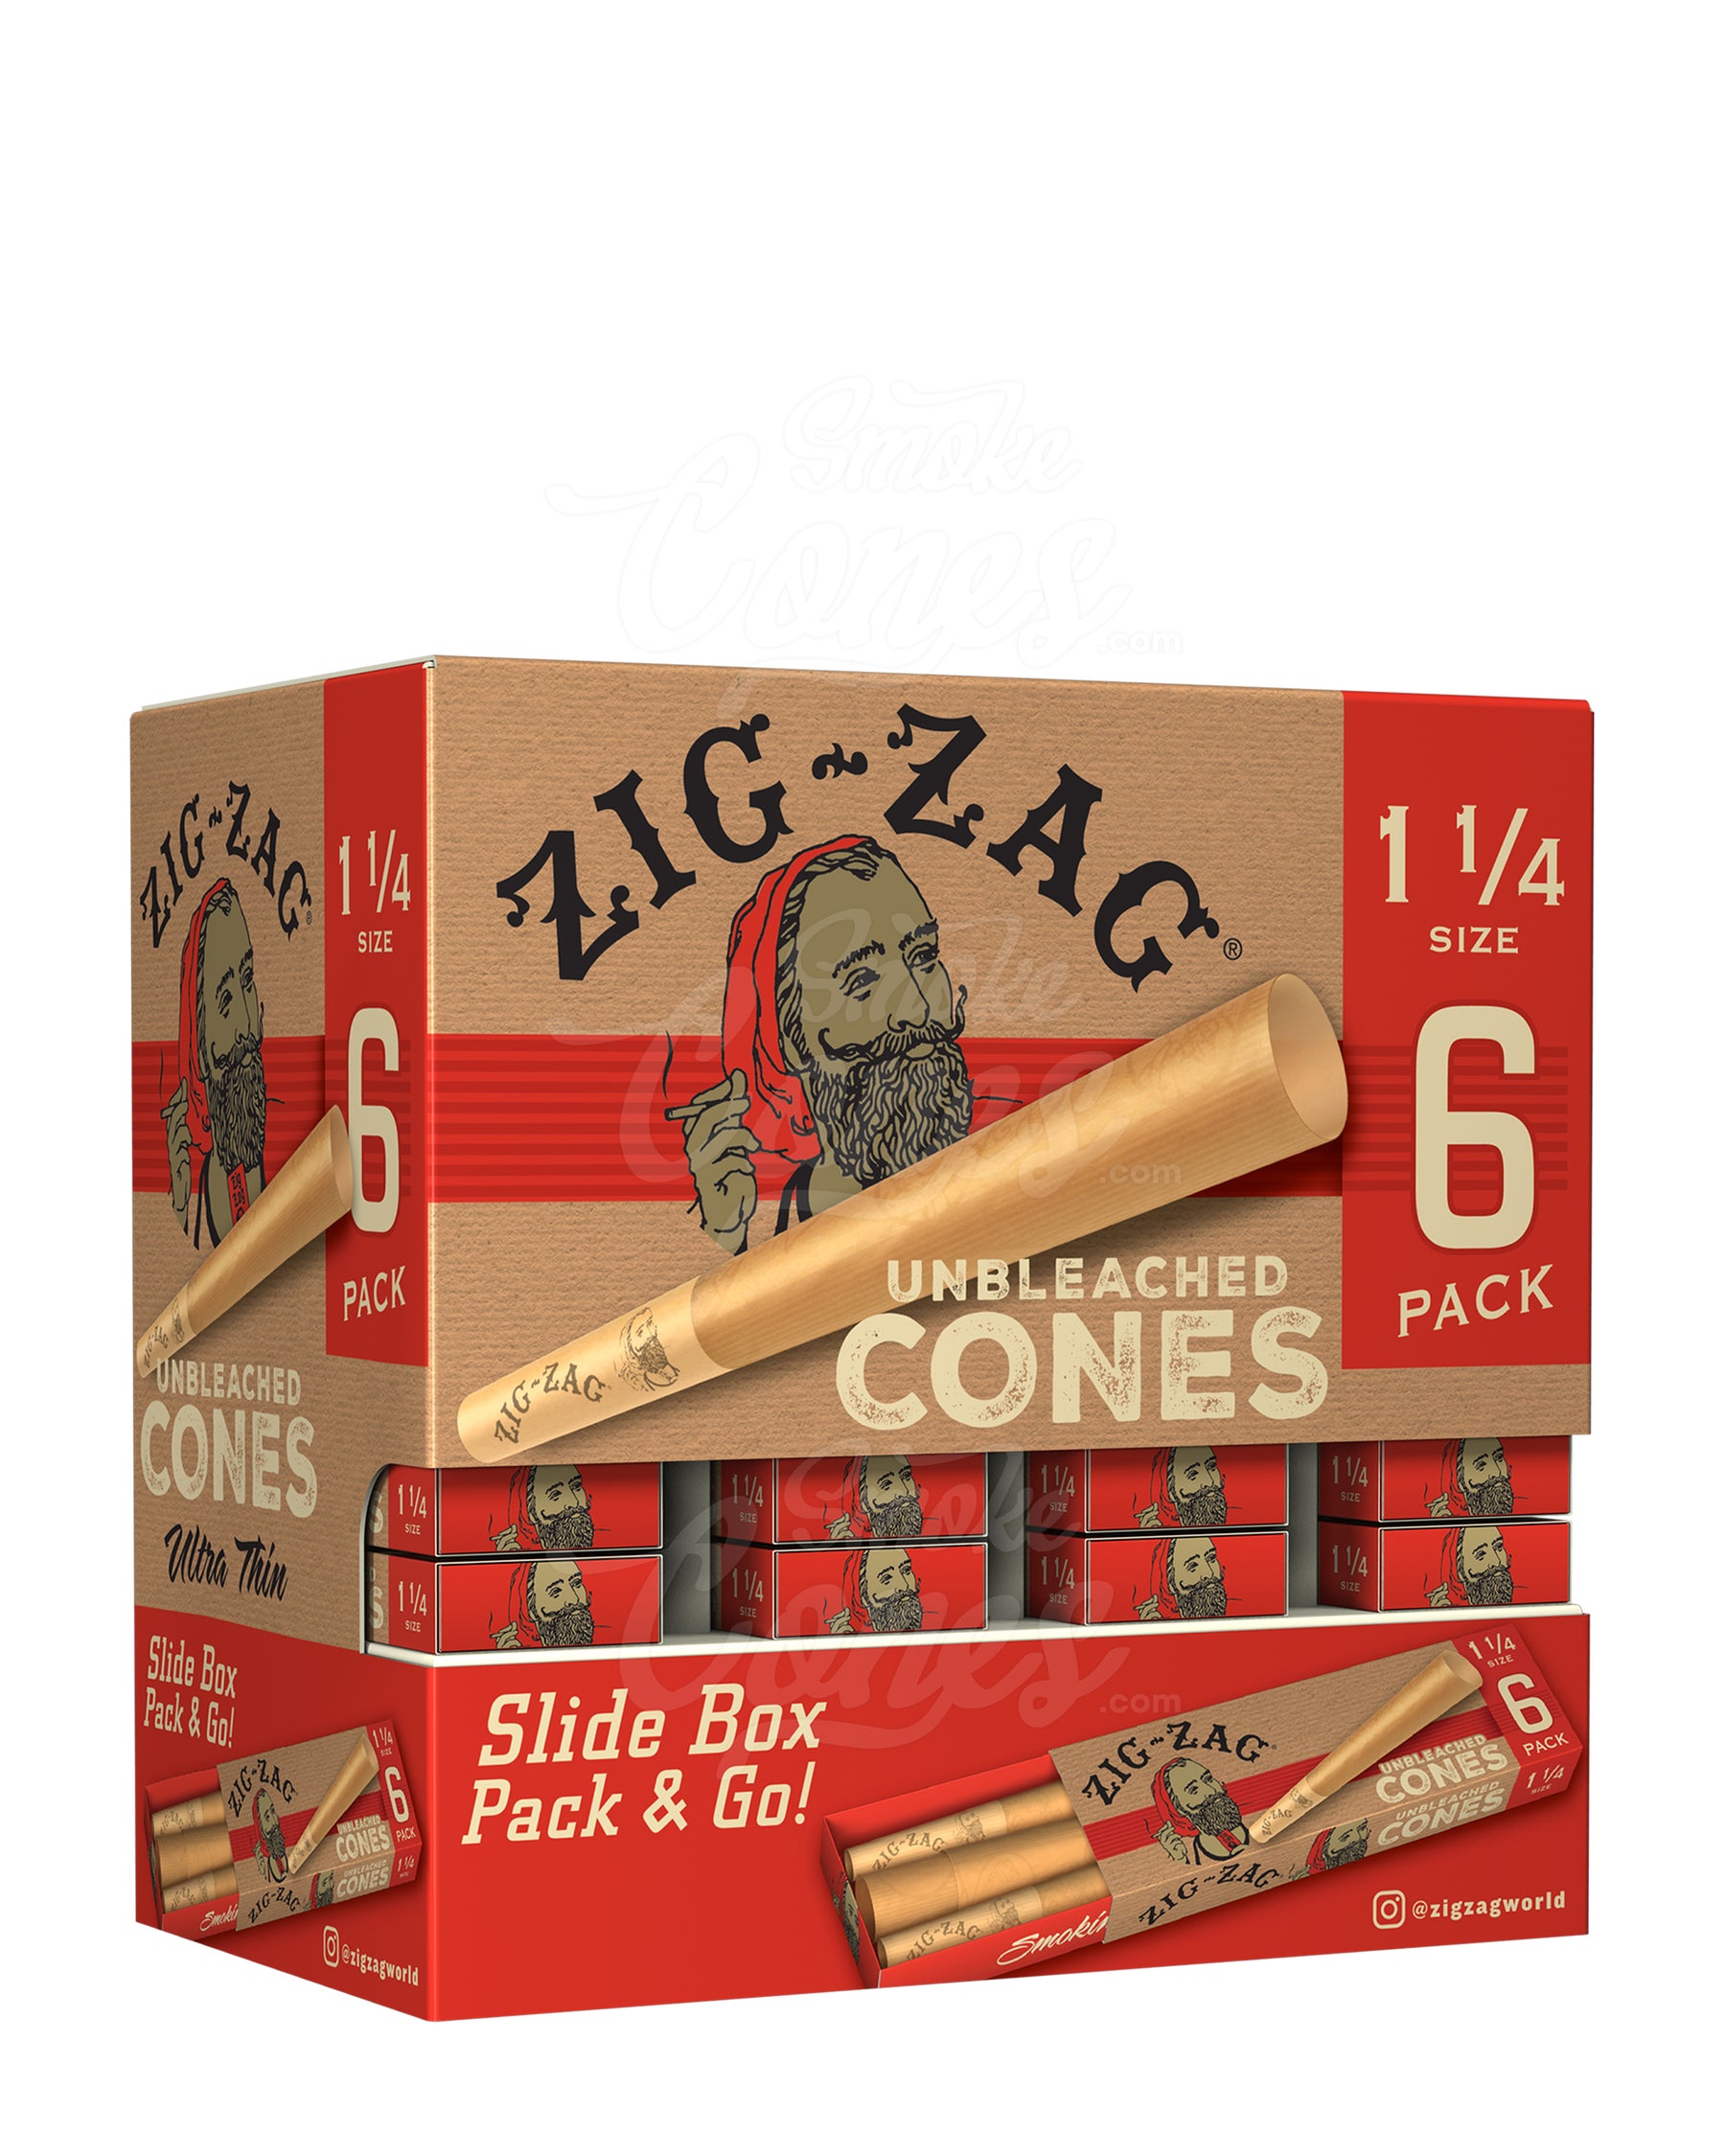 Zig Zag 84mm 1 1/4 Sized Cones Promo Pre Rolled Unbleached Paper Cones 36/Box - 1